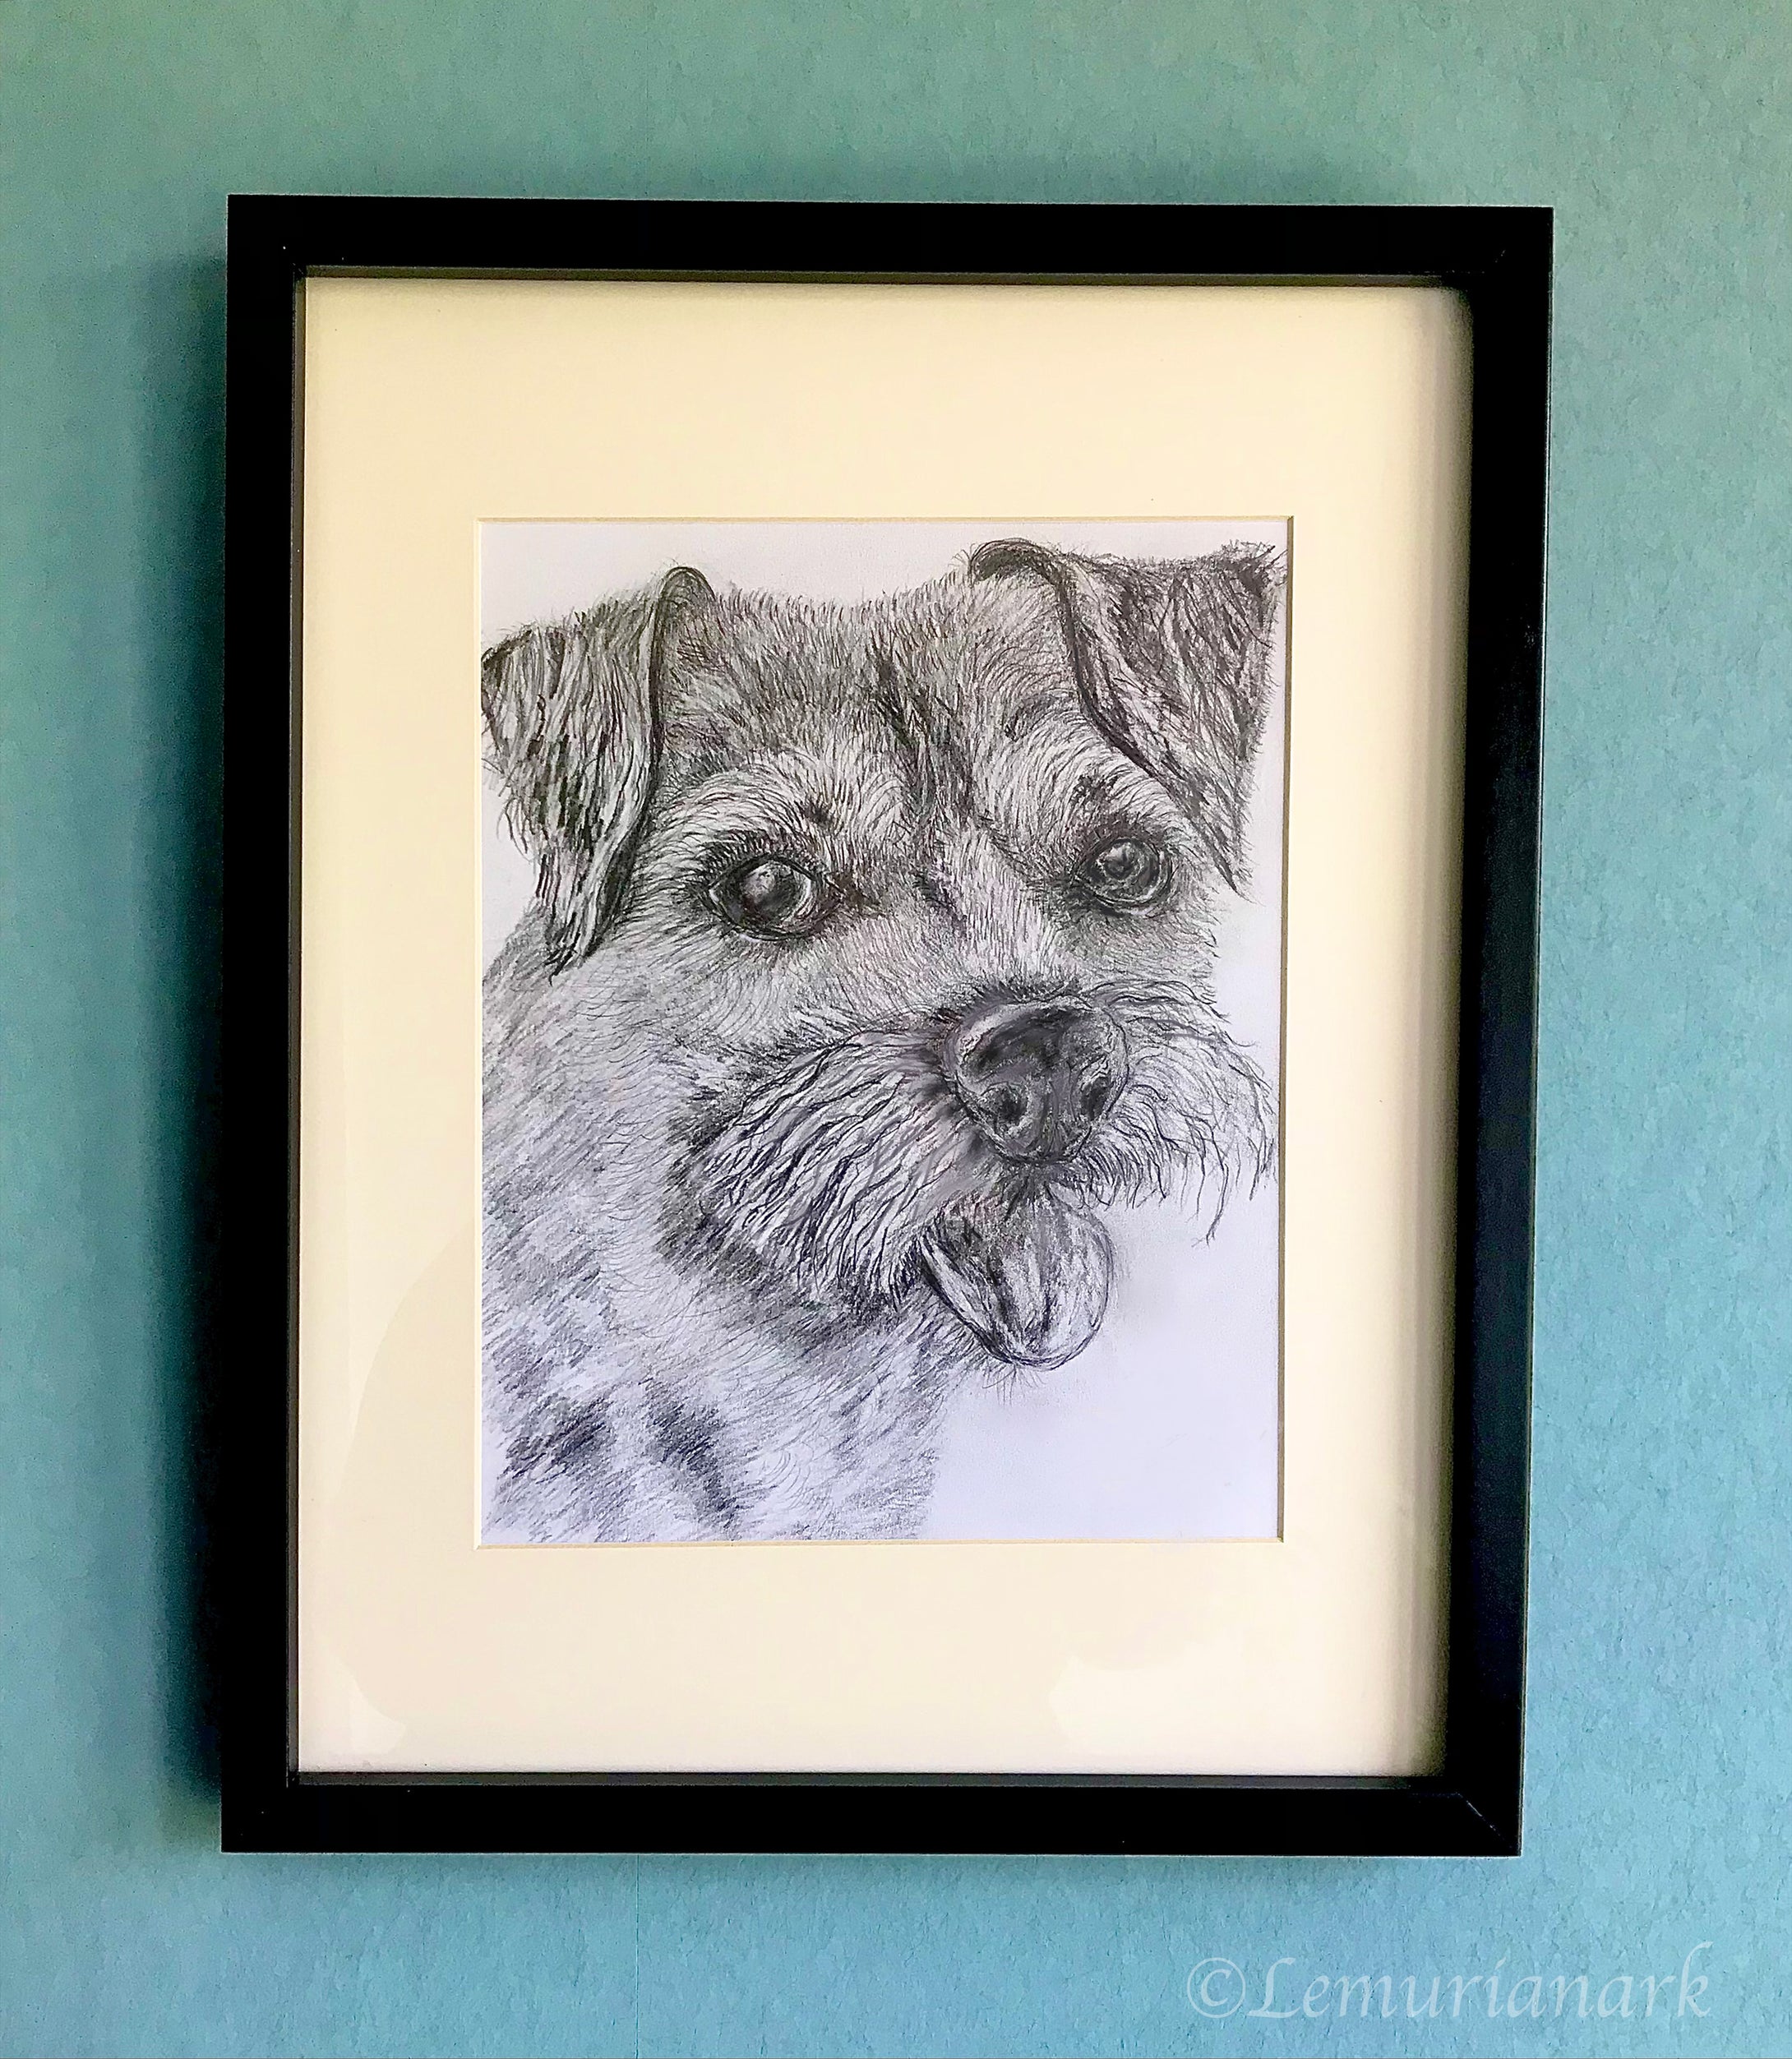 HAND DRAWN PENCIL SKETCH PORTRAIT OF YOUR OWN ANIMAL COMPANION